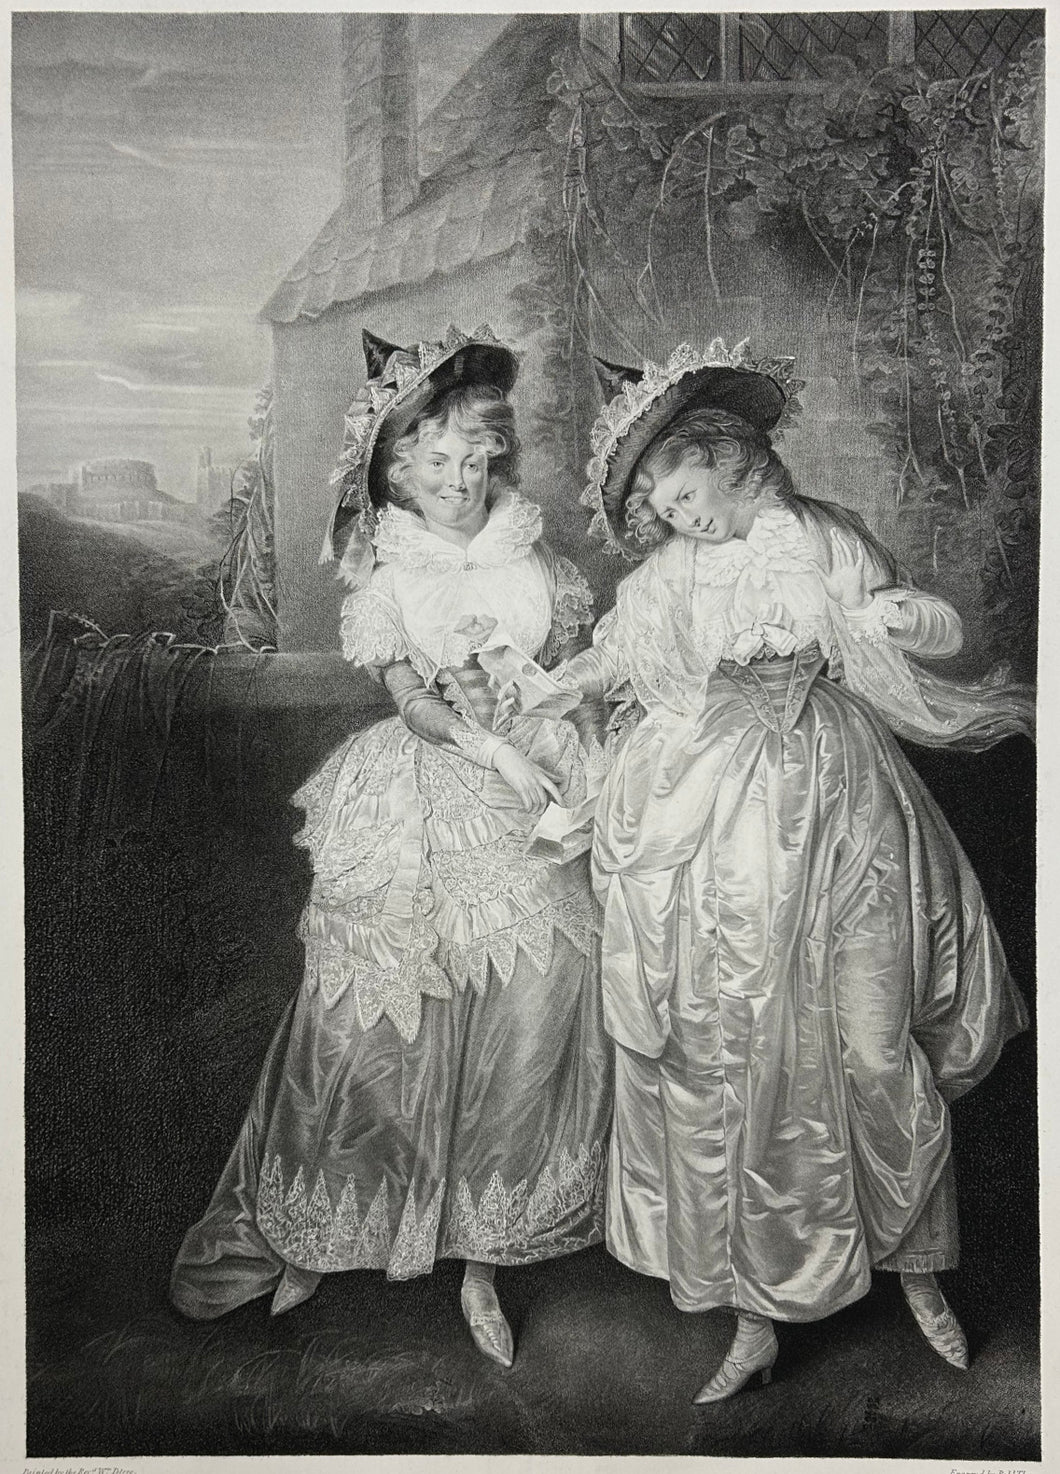 Peters, William Plate 11. “Merry Wives of Windsor, Act II, Scene i. Mrs. Page and Mrs. Ford